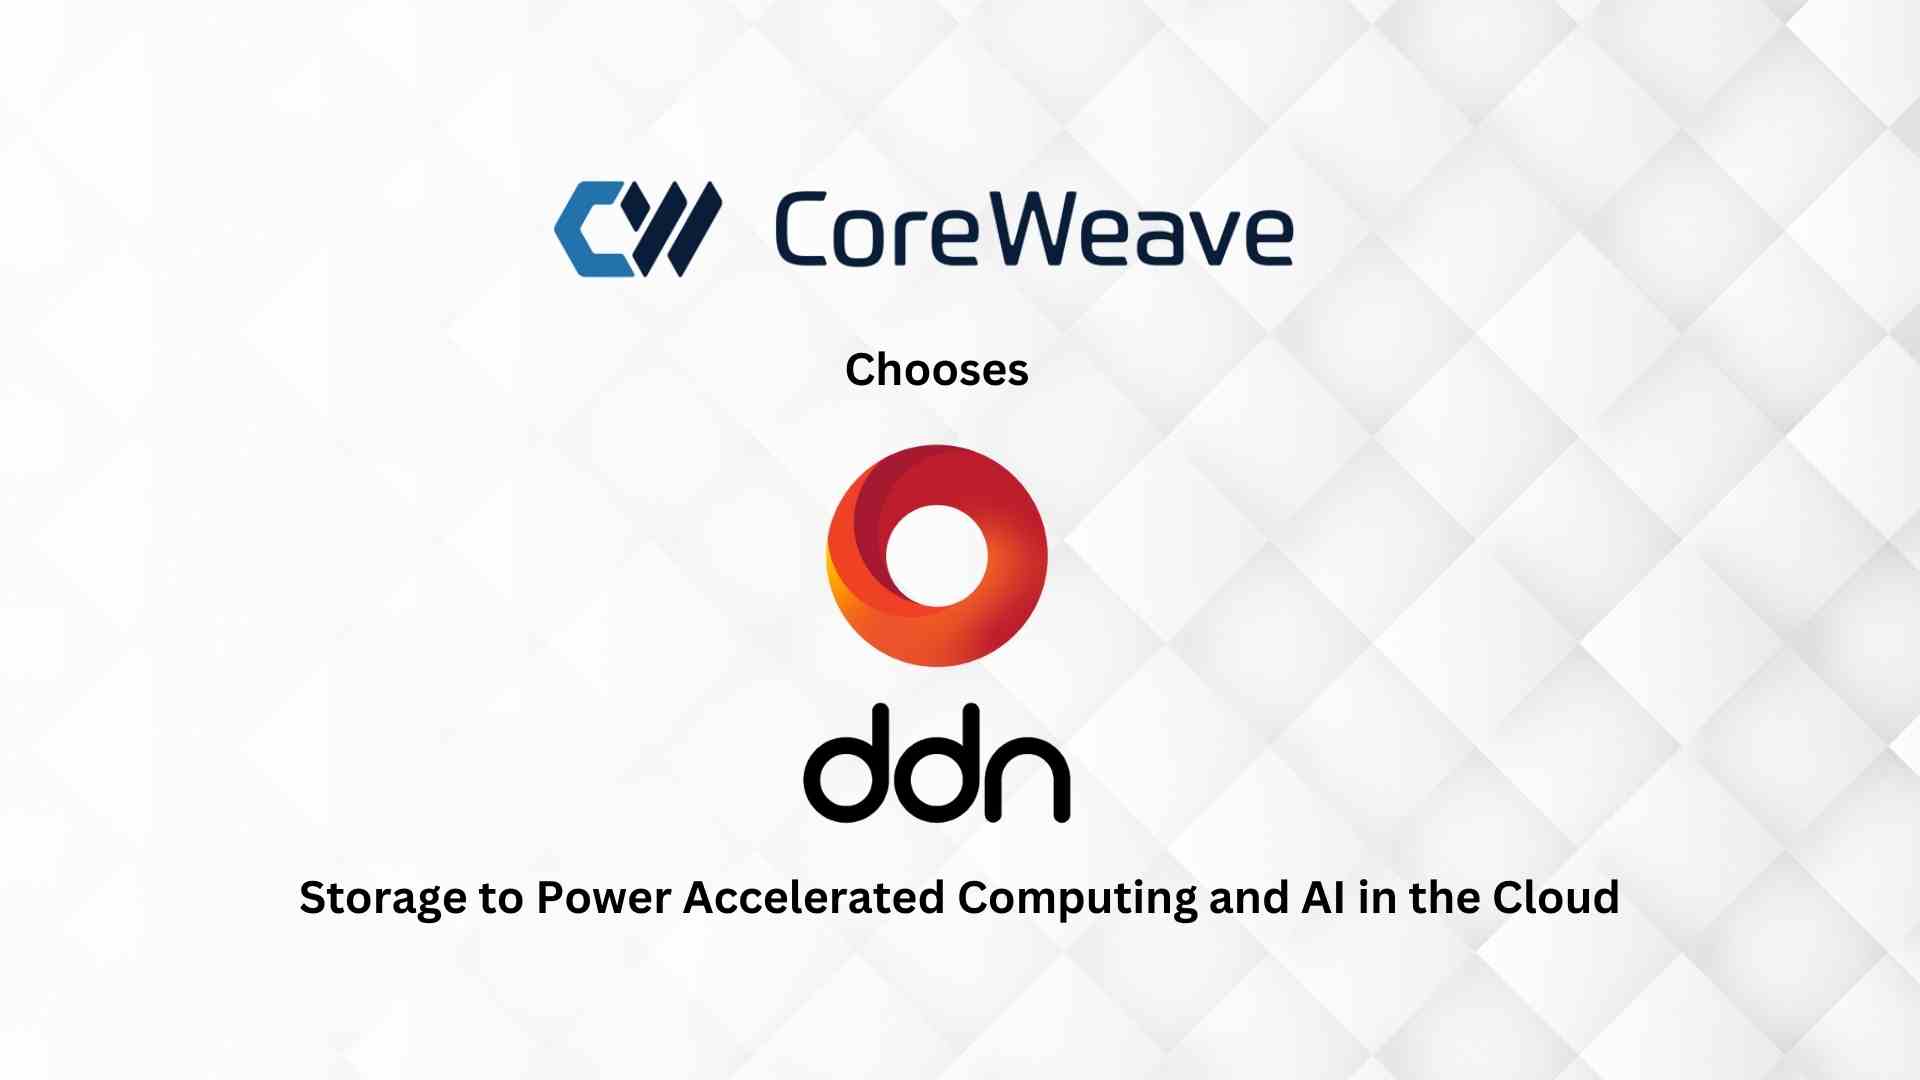 CoreWeave Chooses DDN Storage to Power Accelerated Computing and AI in the Cloud